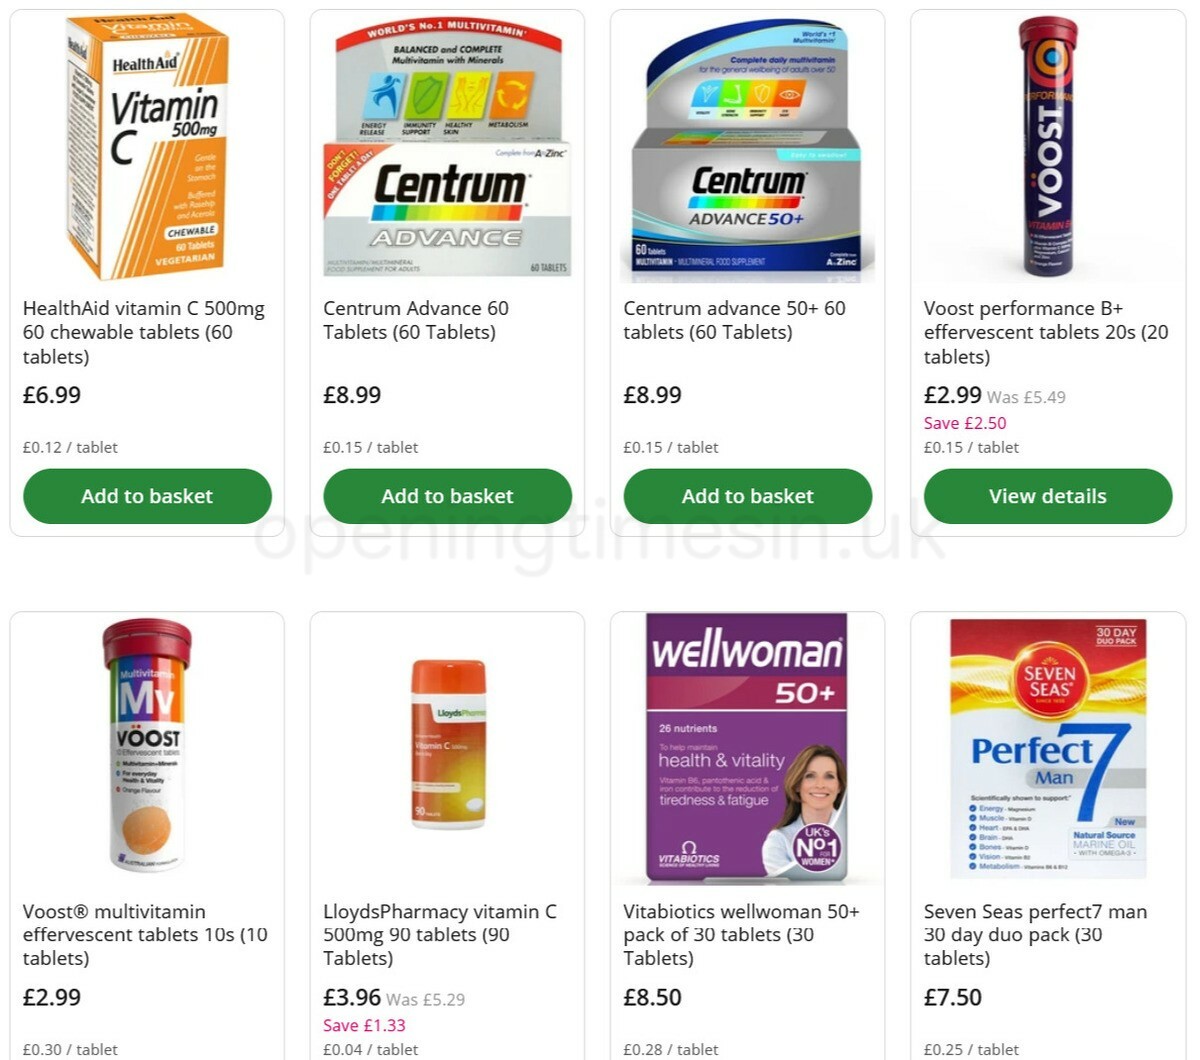 Lloyds Pharmacy Offers from 20 April